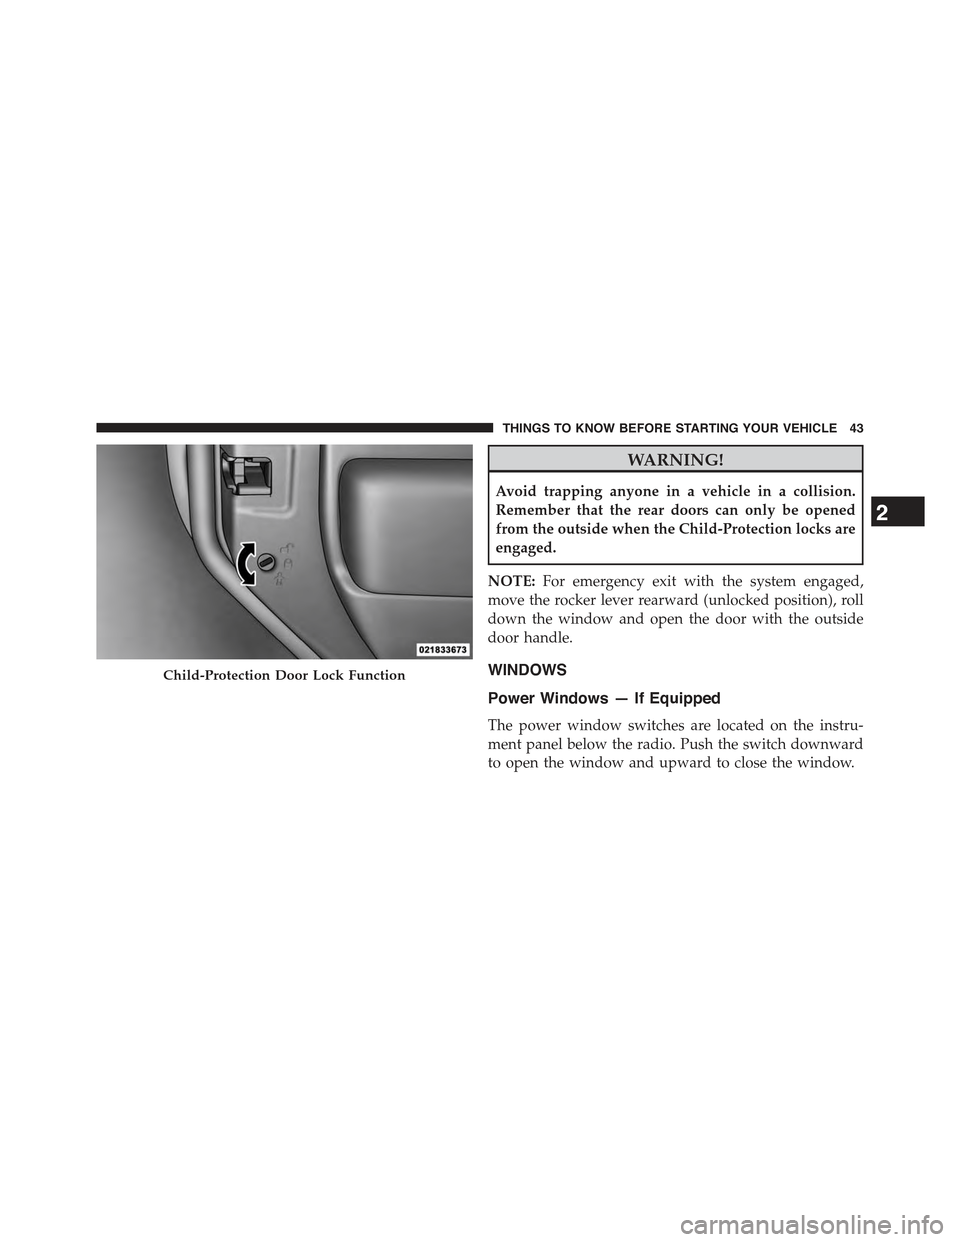 JEEP WRANGLER 2015 JK / 3.G Service Manual WARNING!
Avoid trapping anyone in a vehicle in a collision.
Remember that the rear doors can only be opened
from the outside when the Child-Protection locks are
engaged.
NOTE:For emergency exit with t